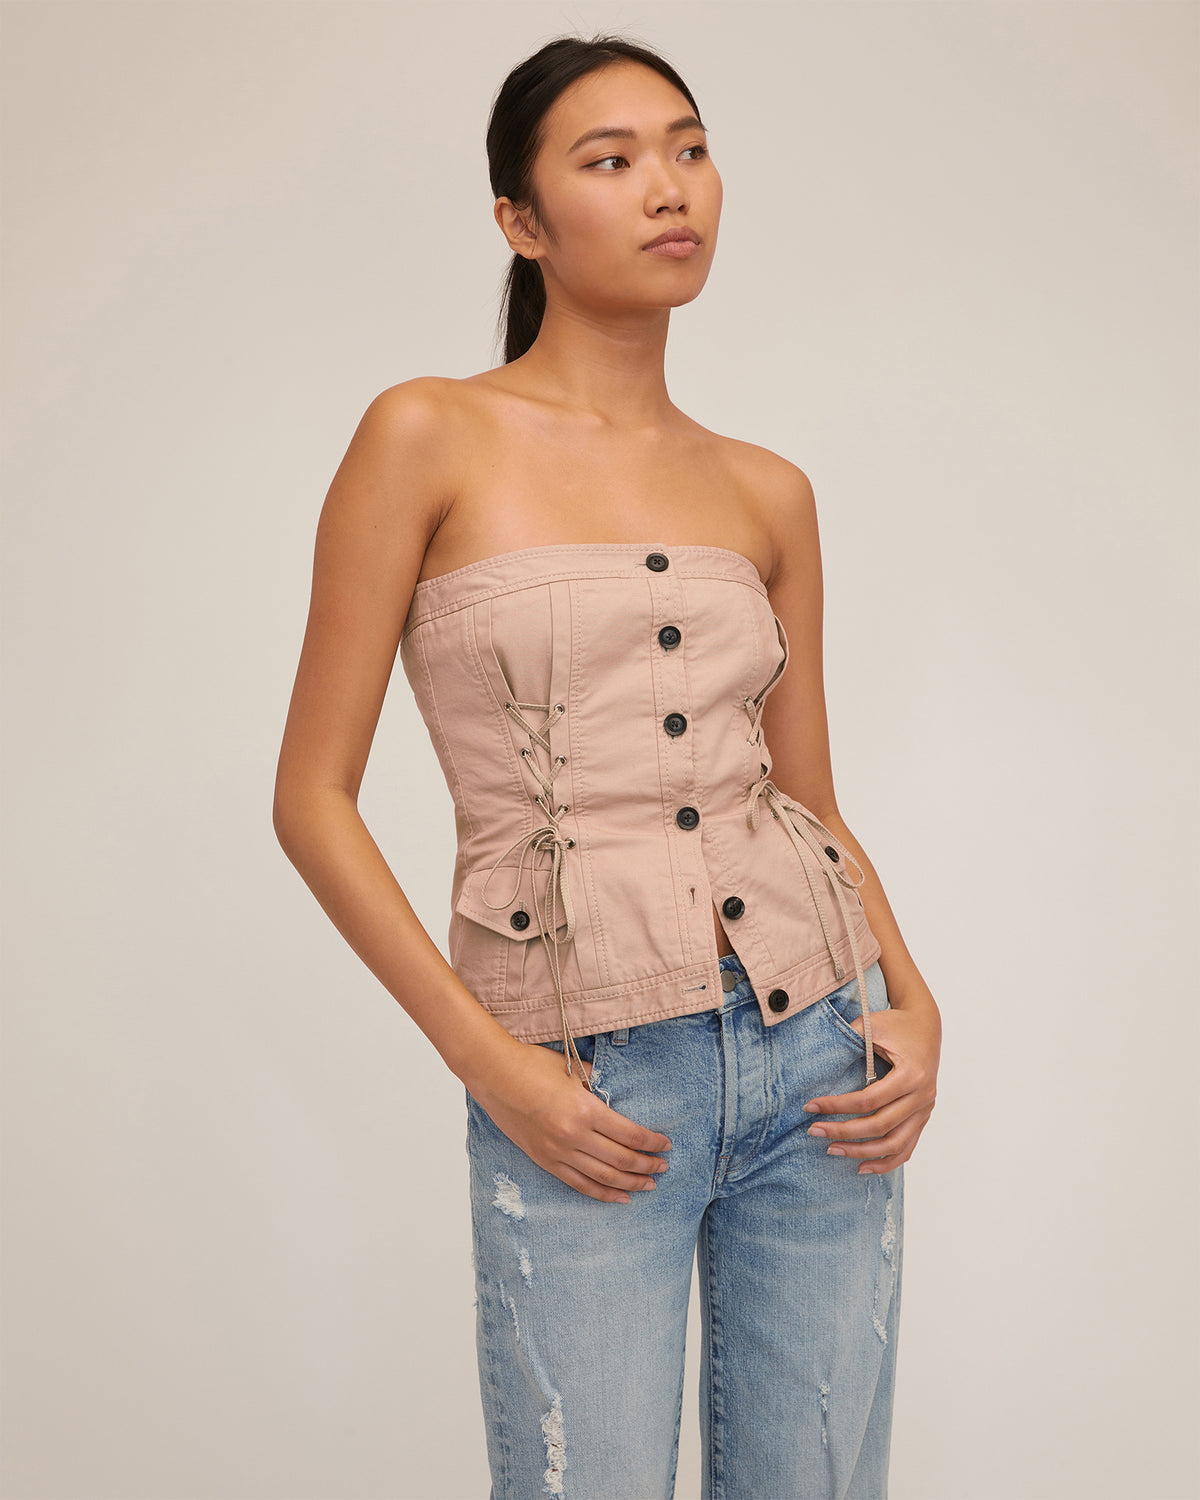 Corset Lacing Styles: 4 Different Ways to Lace Up Your Corset